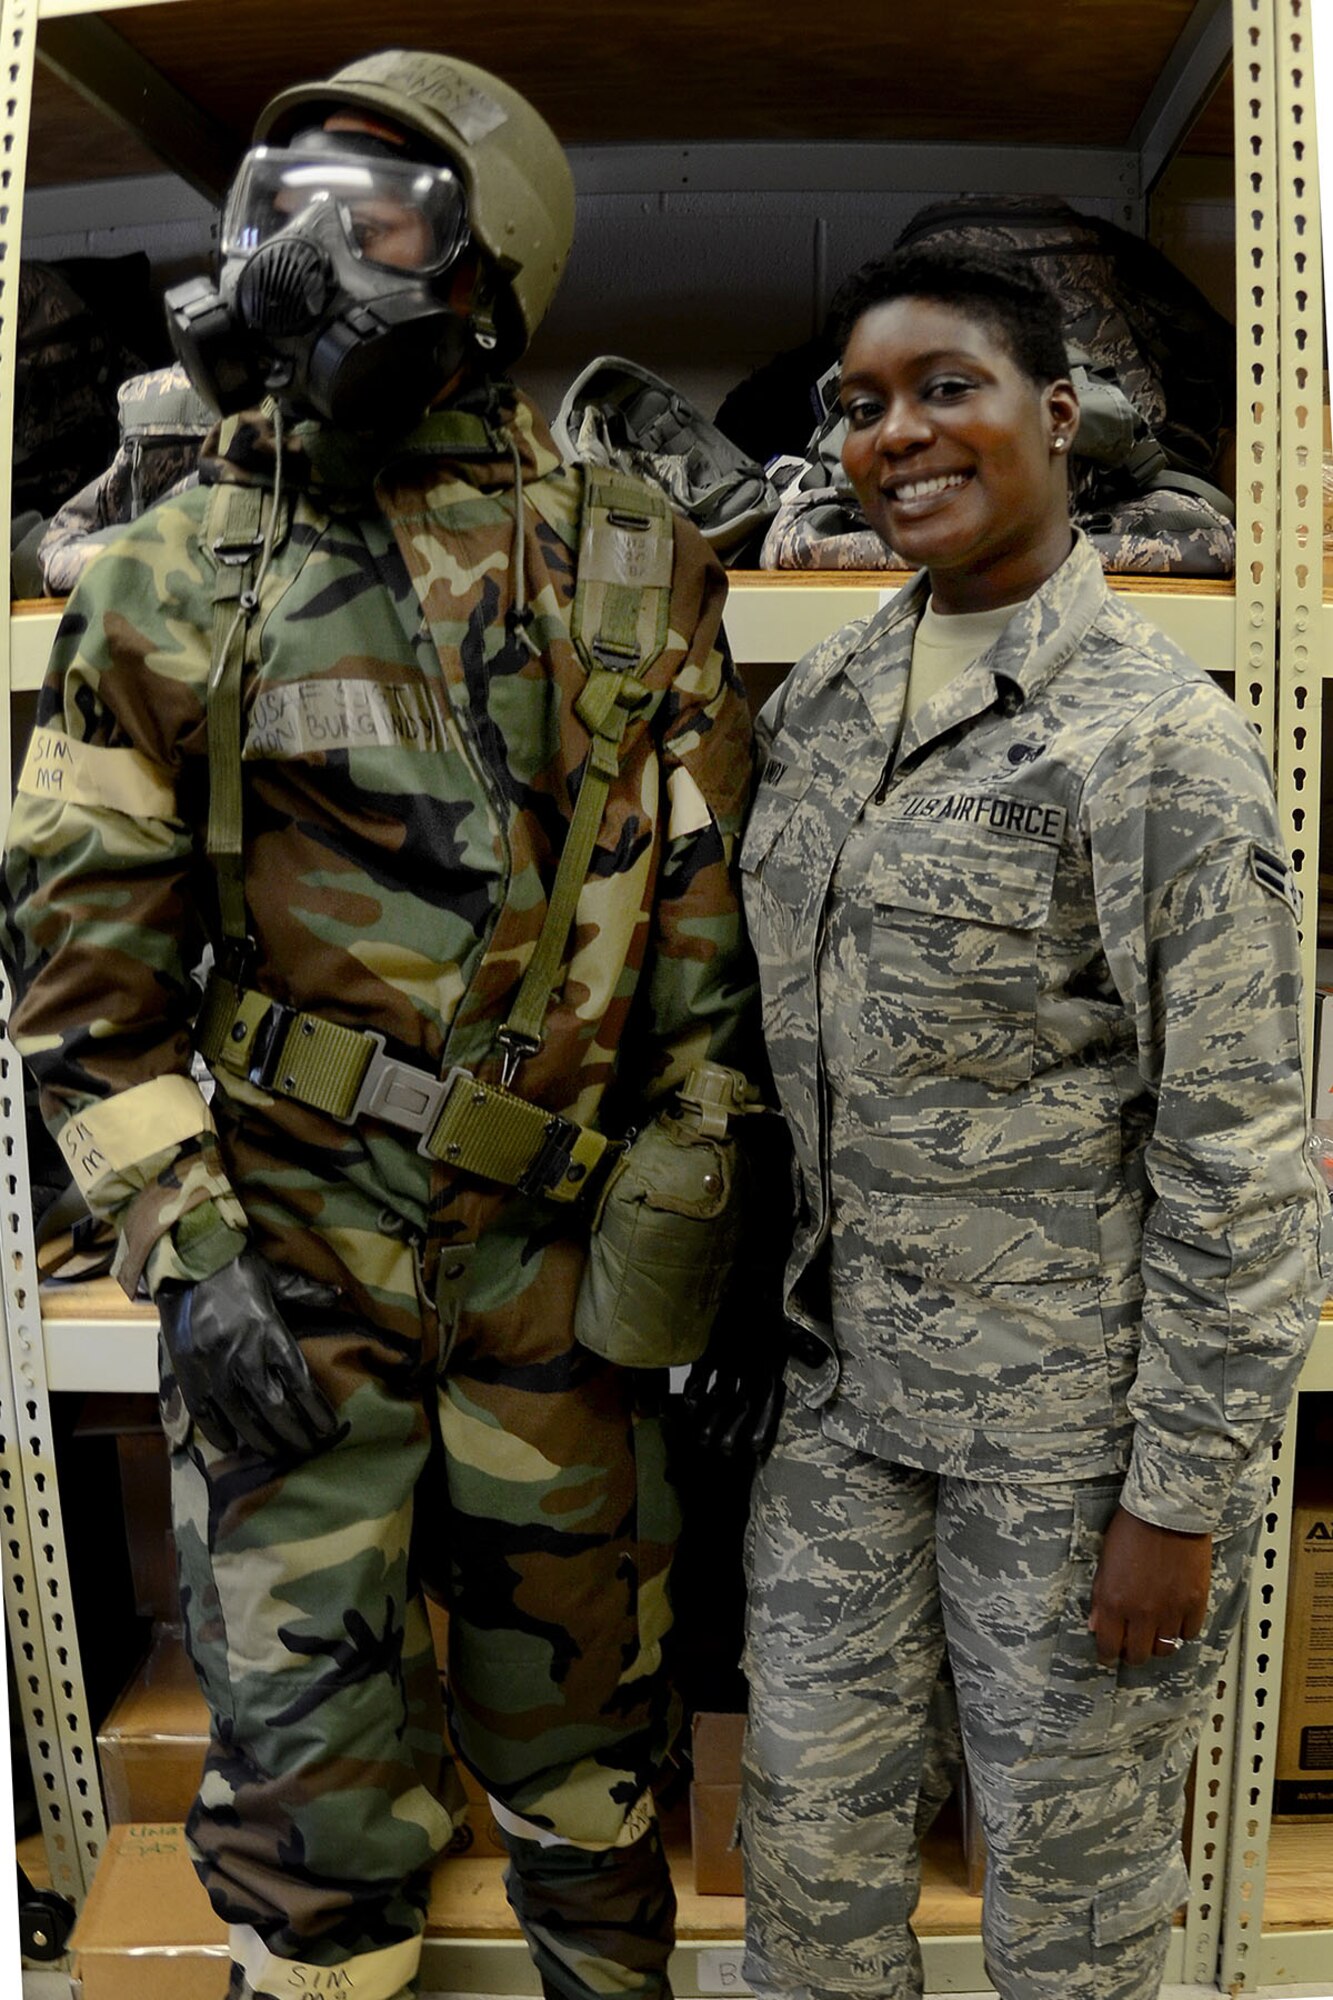 U.S. Air Force Airman 1st Class Angel Knox, an emergency management technician assigned to the 169th Civil Engineering Squadron of the South Carolina Air National Guard on June 14, 2015, at McEntire Joint National Guard Base, S.C.  (U.S. Air National Guard photo by Airman 1st Class Ashleigh S. Pavelek/Released)